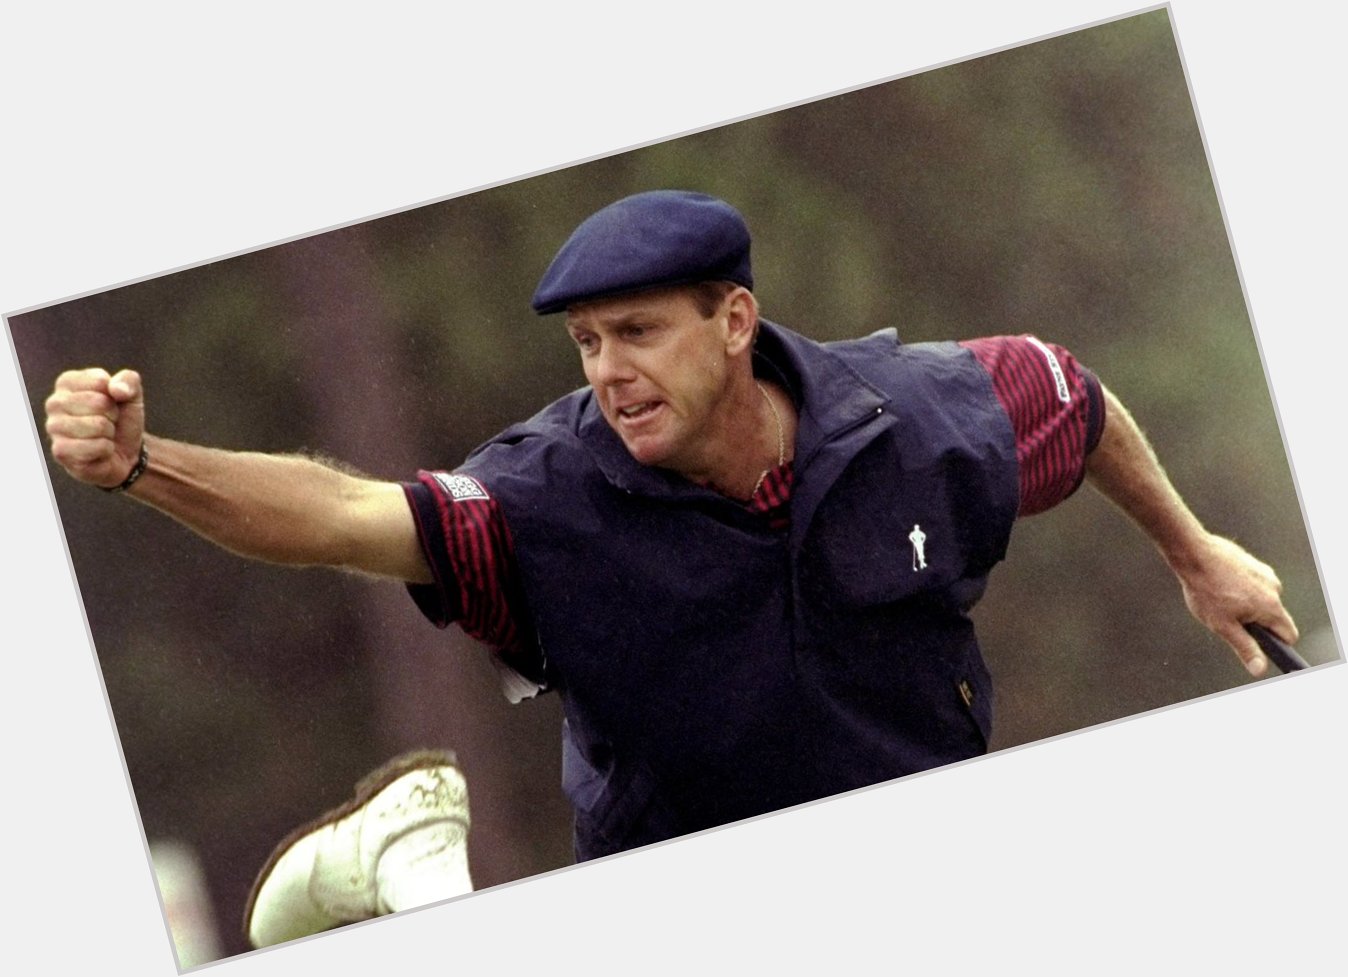 Happy 61st birthday Payne Stewart.

You are truly missed. 